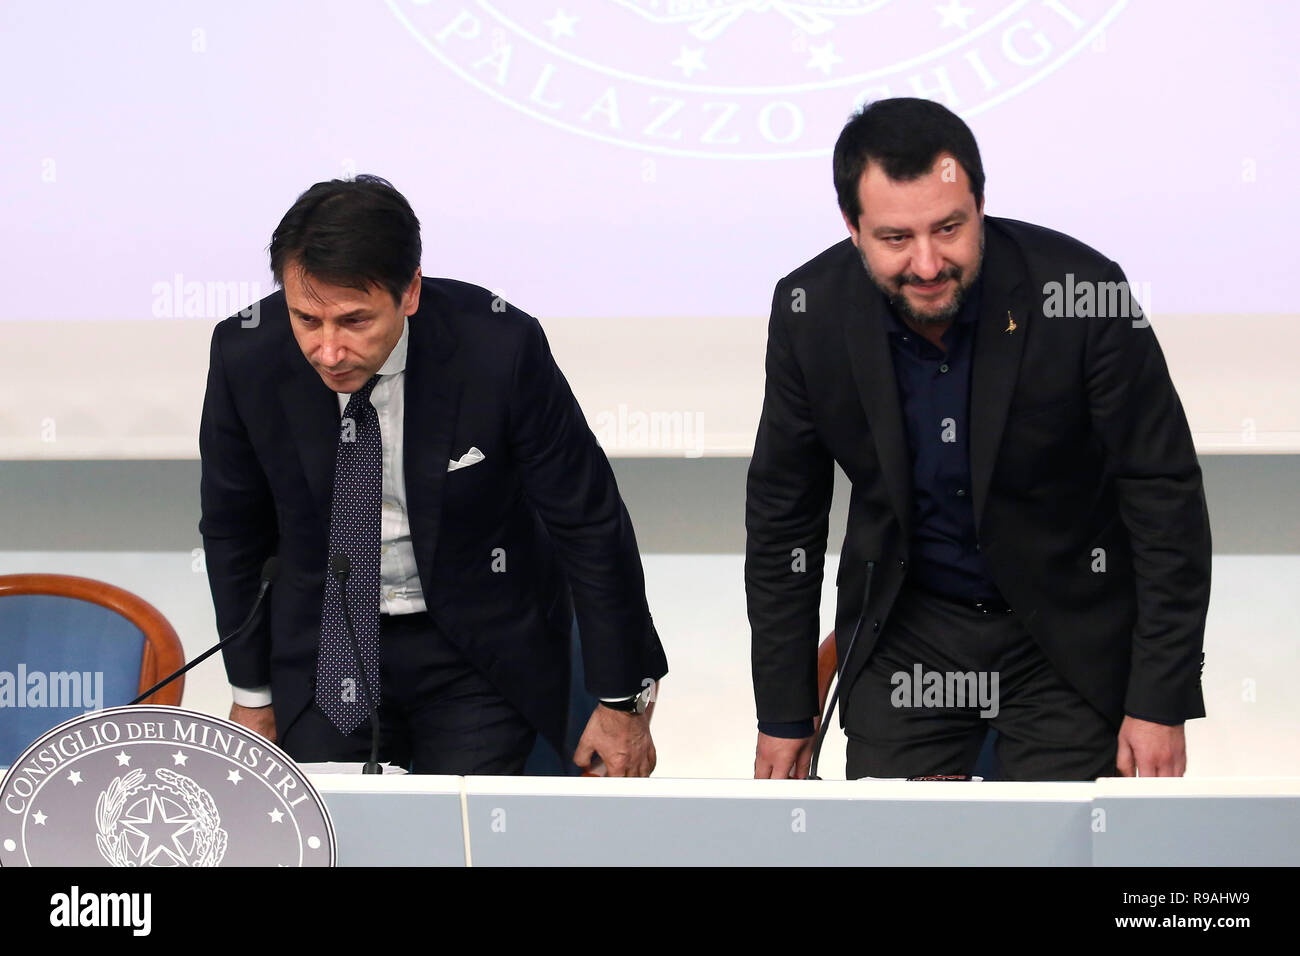 Rome Italy. 21st December 2018. Italian premier Giuseppe Conte and  Minister of Internal Affairs Matteo Salvini Rome December 21st 2018. Palazzo Chigi. Press conference at the end of Minister's cabinet. Foto Samantha Zucchi Insidefoto Credit: insidefoto srl/Alamy Live News Stock Photo